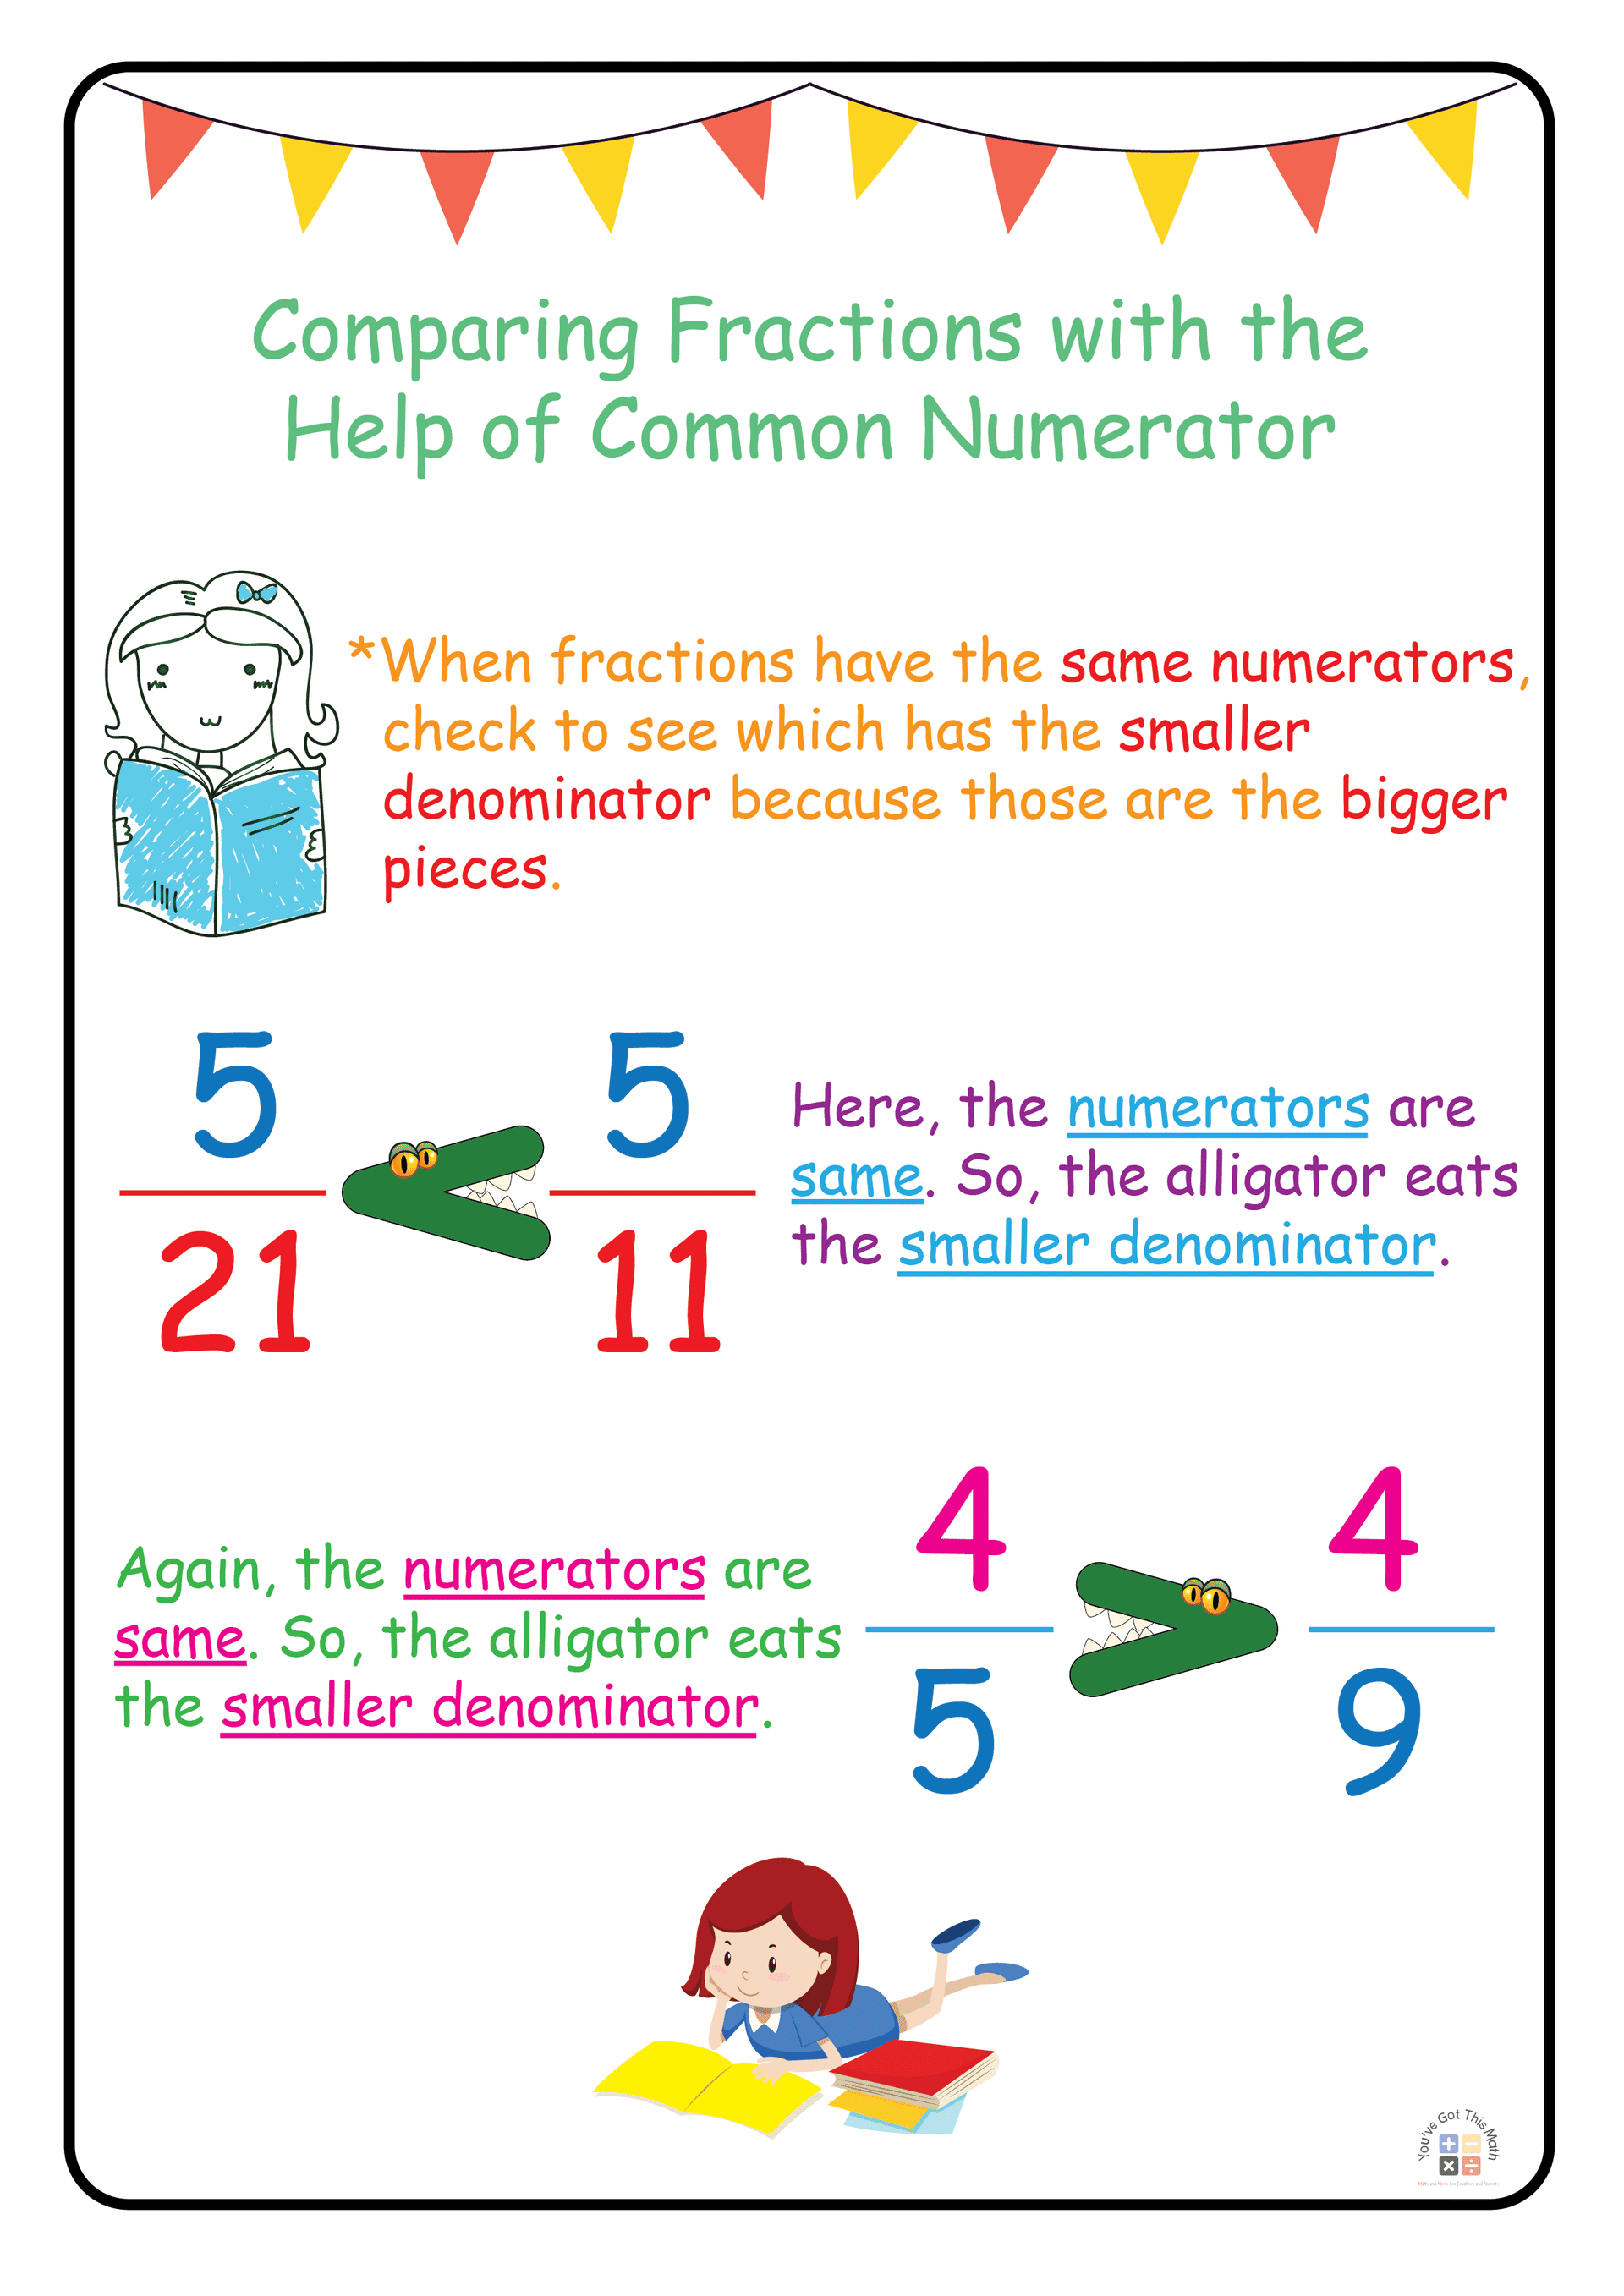 Comparing Fractions with the Help of Common Numerator